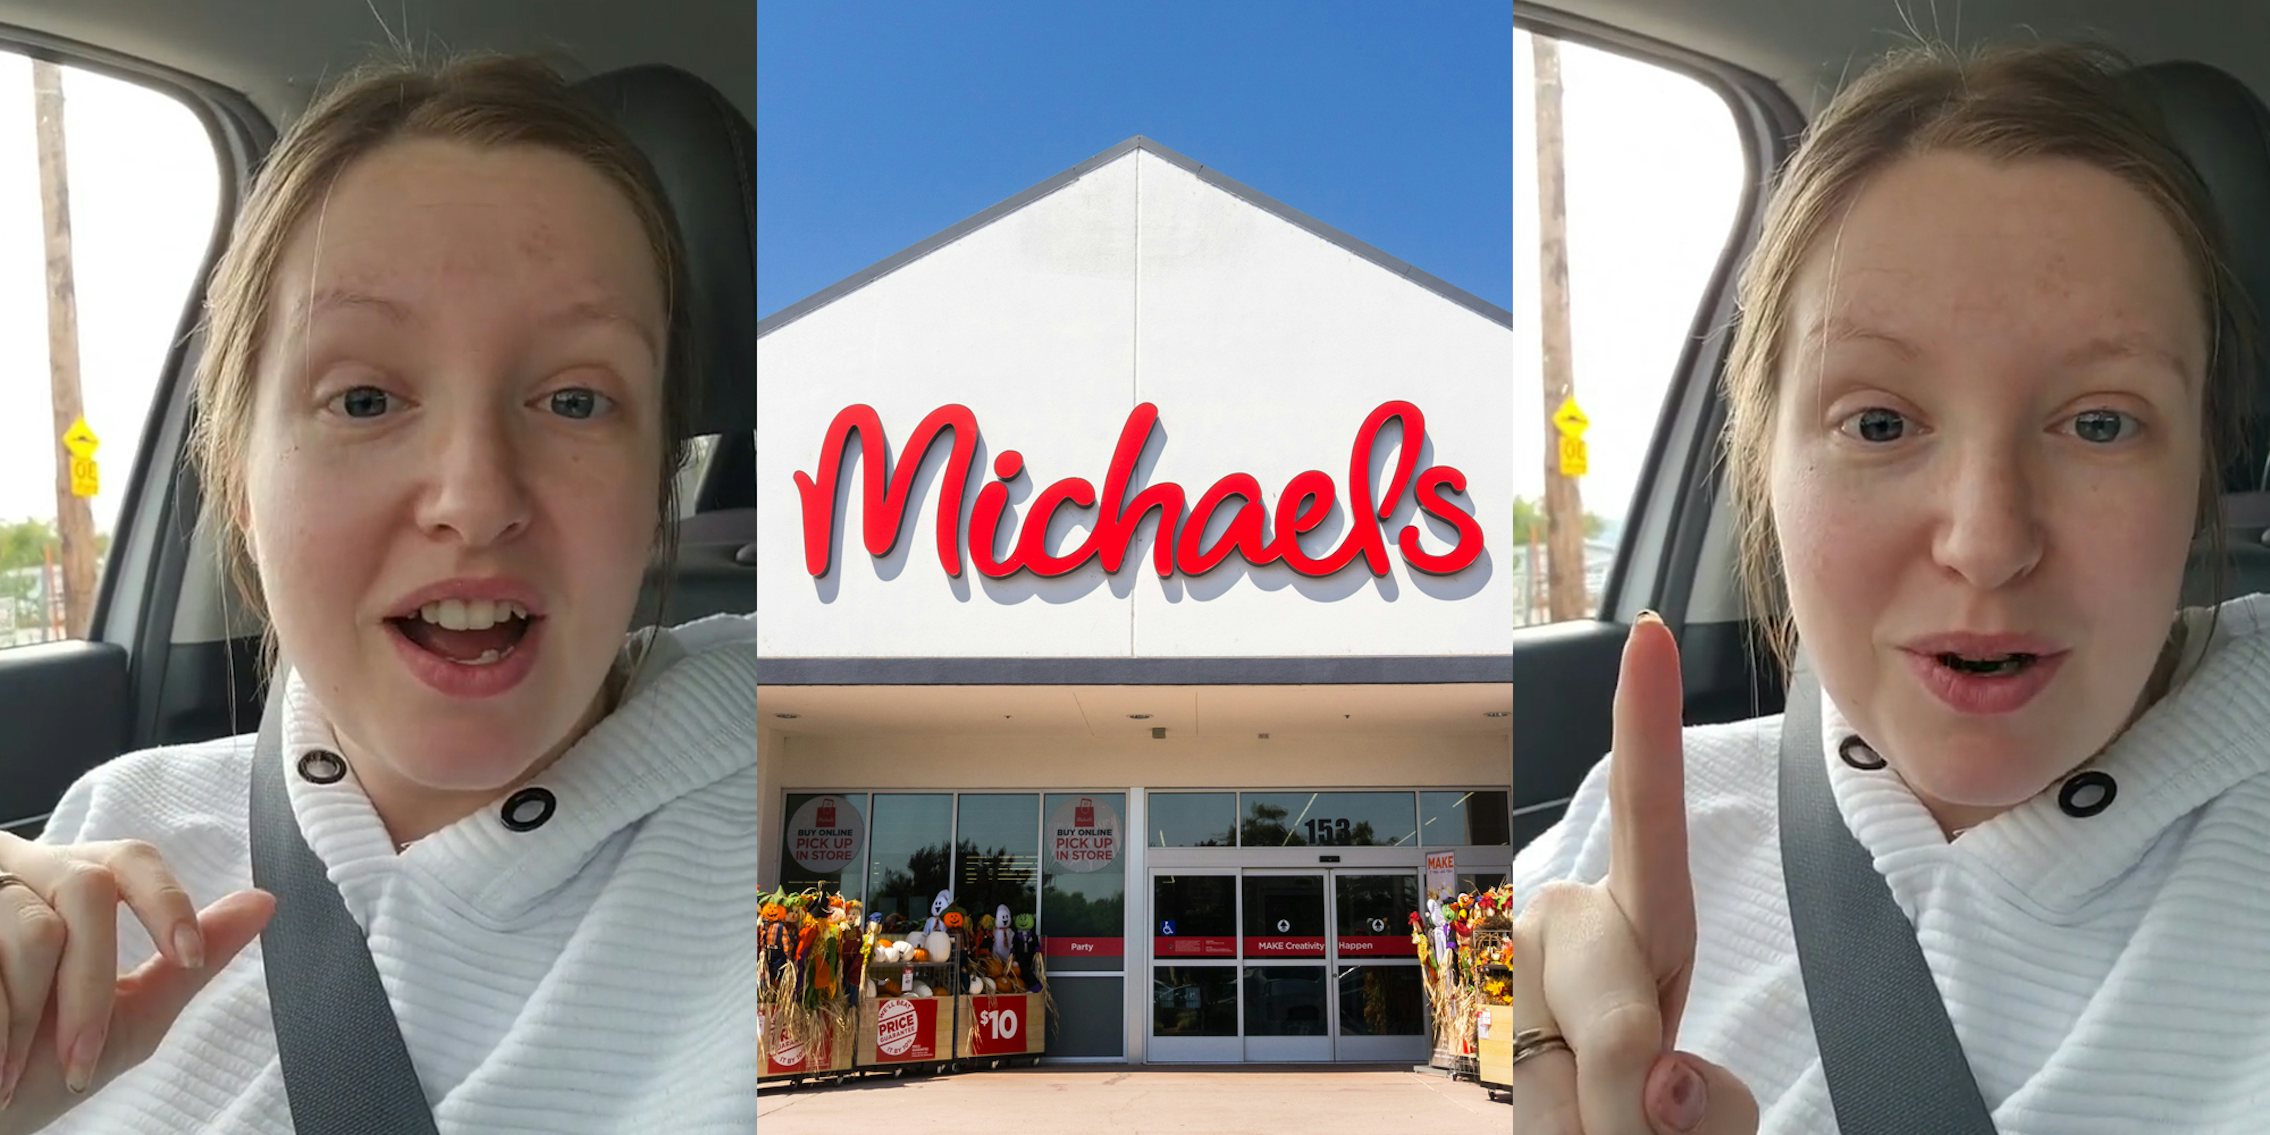 woman speaking in car (l) Michaels store with sign (c) woman speaking in car with finger up (r)